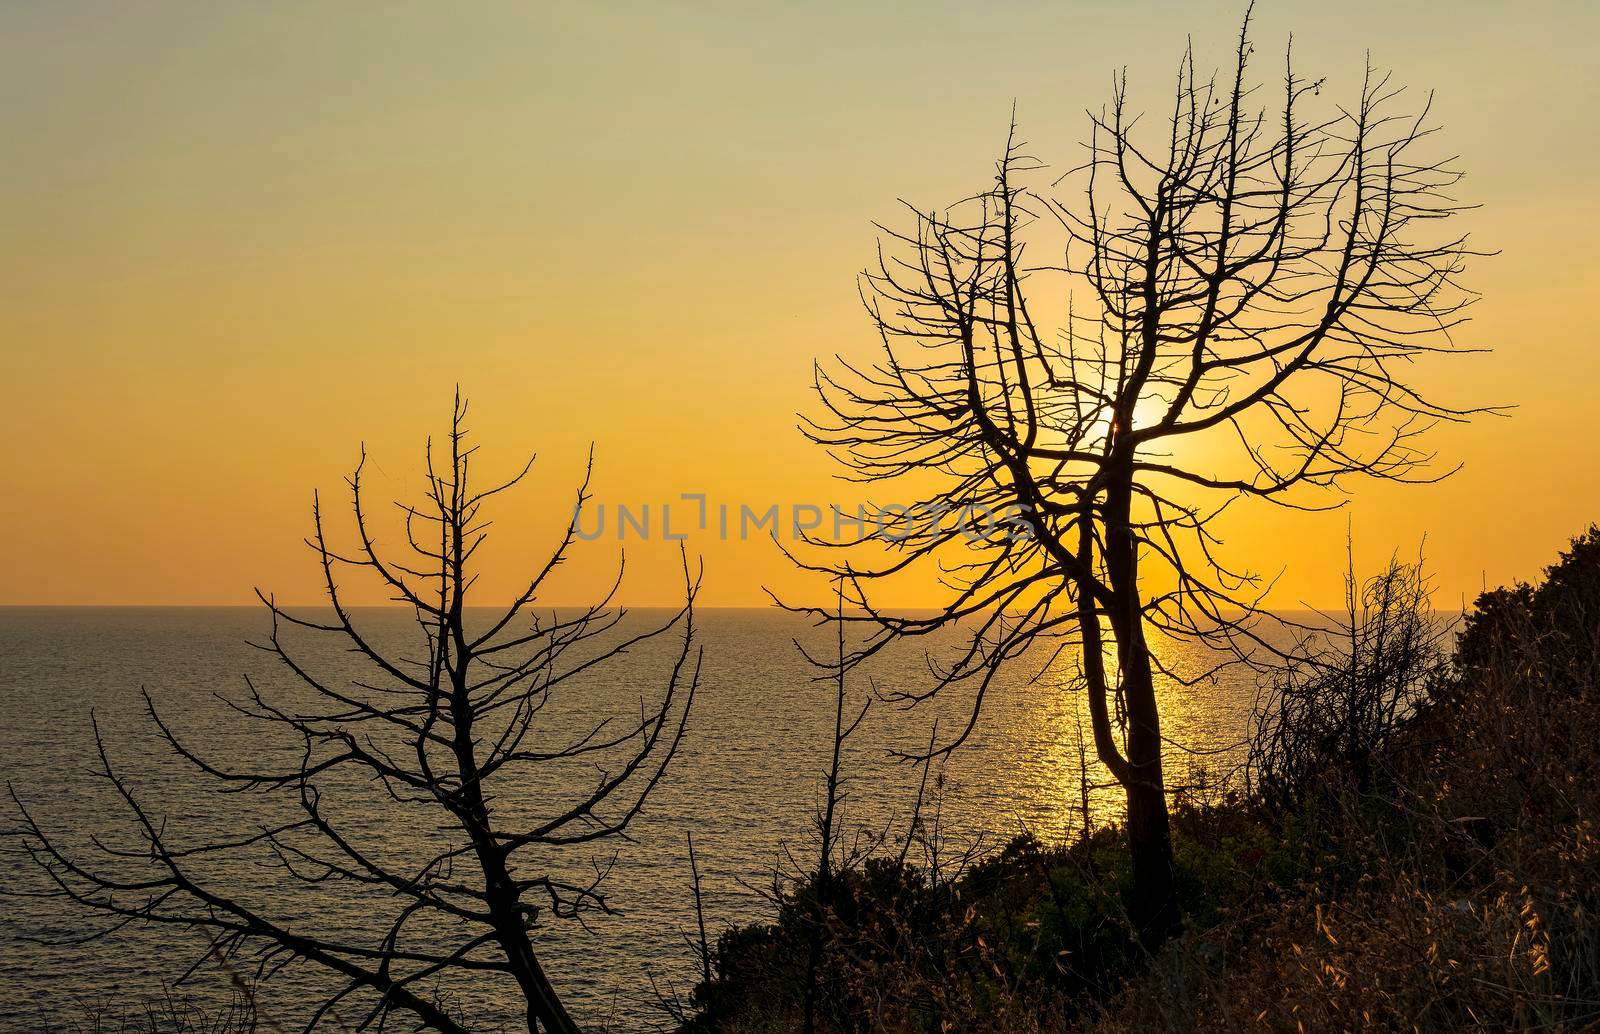 Tree at sunset in Palaiokastro castle of ancient Pylos, Greece